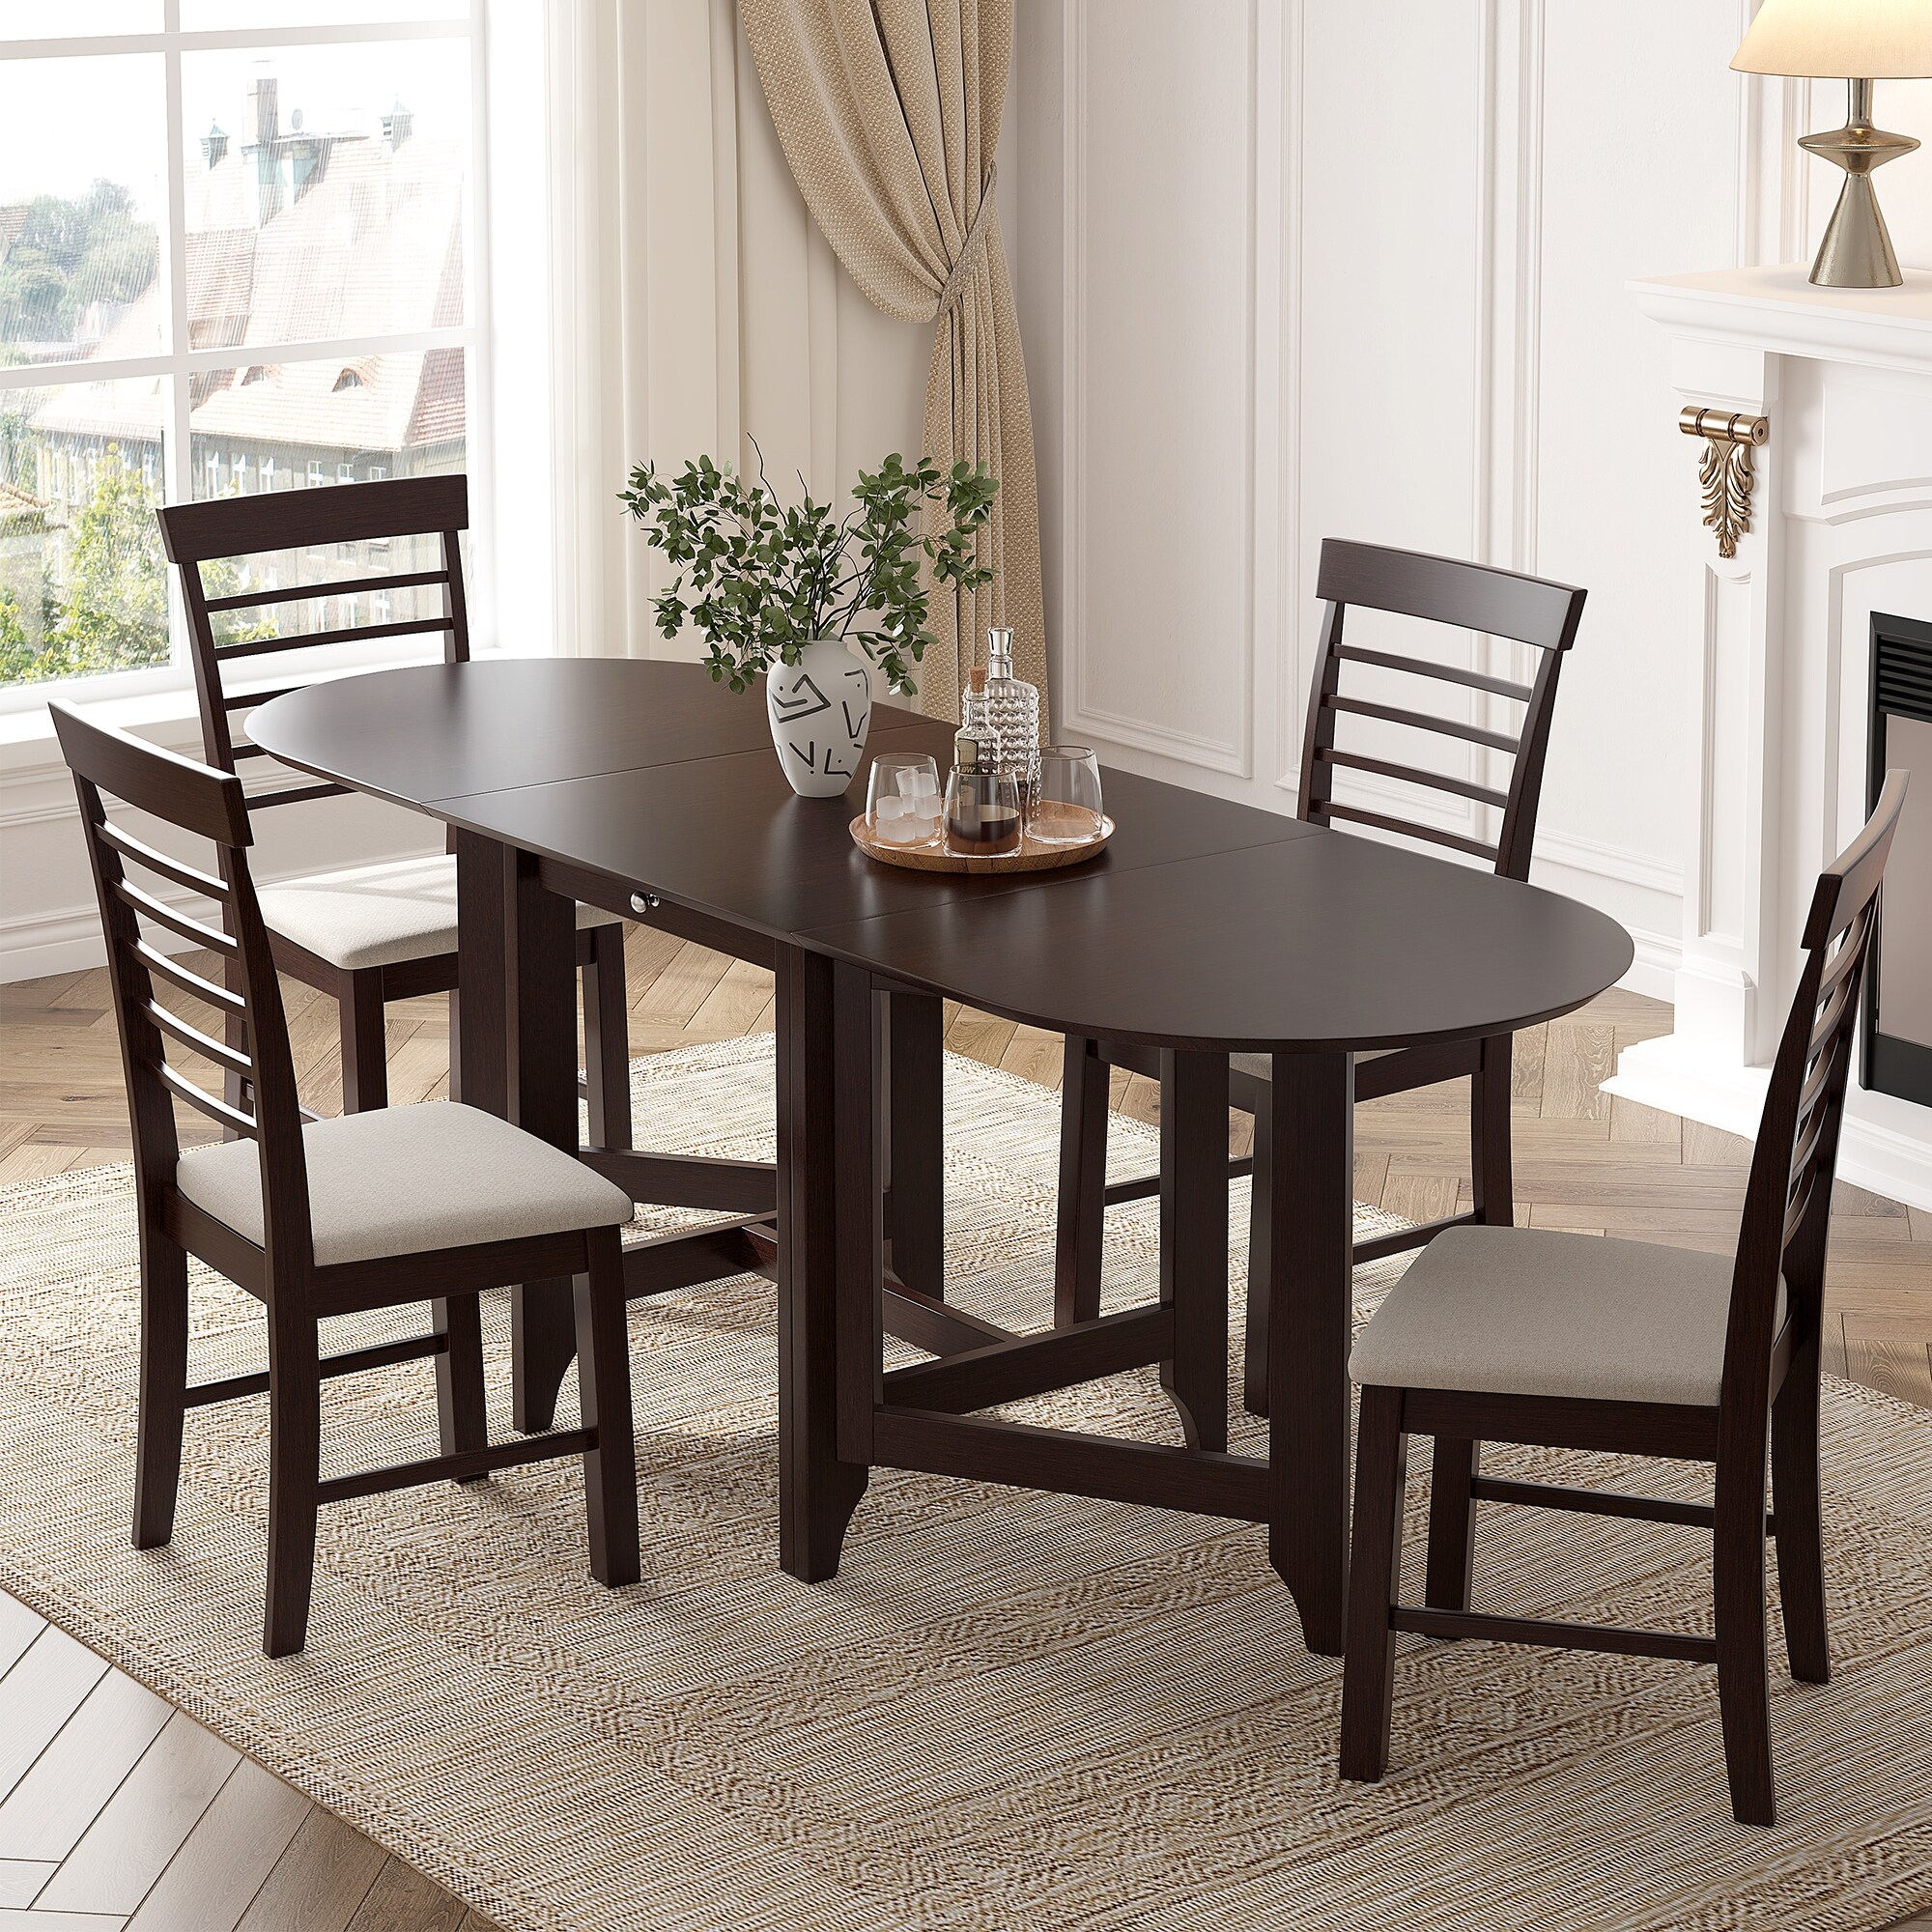 5-Piece Retro Drop-Leaf Table with Spacious Tabletop and Drawer, Rubberwood 4 PCS Upholstered Dining Chair with Backrest